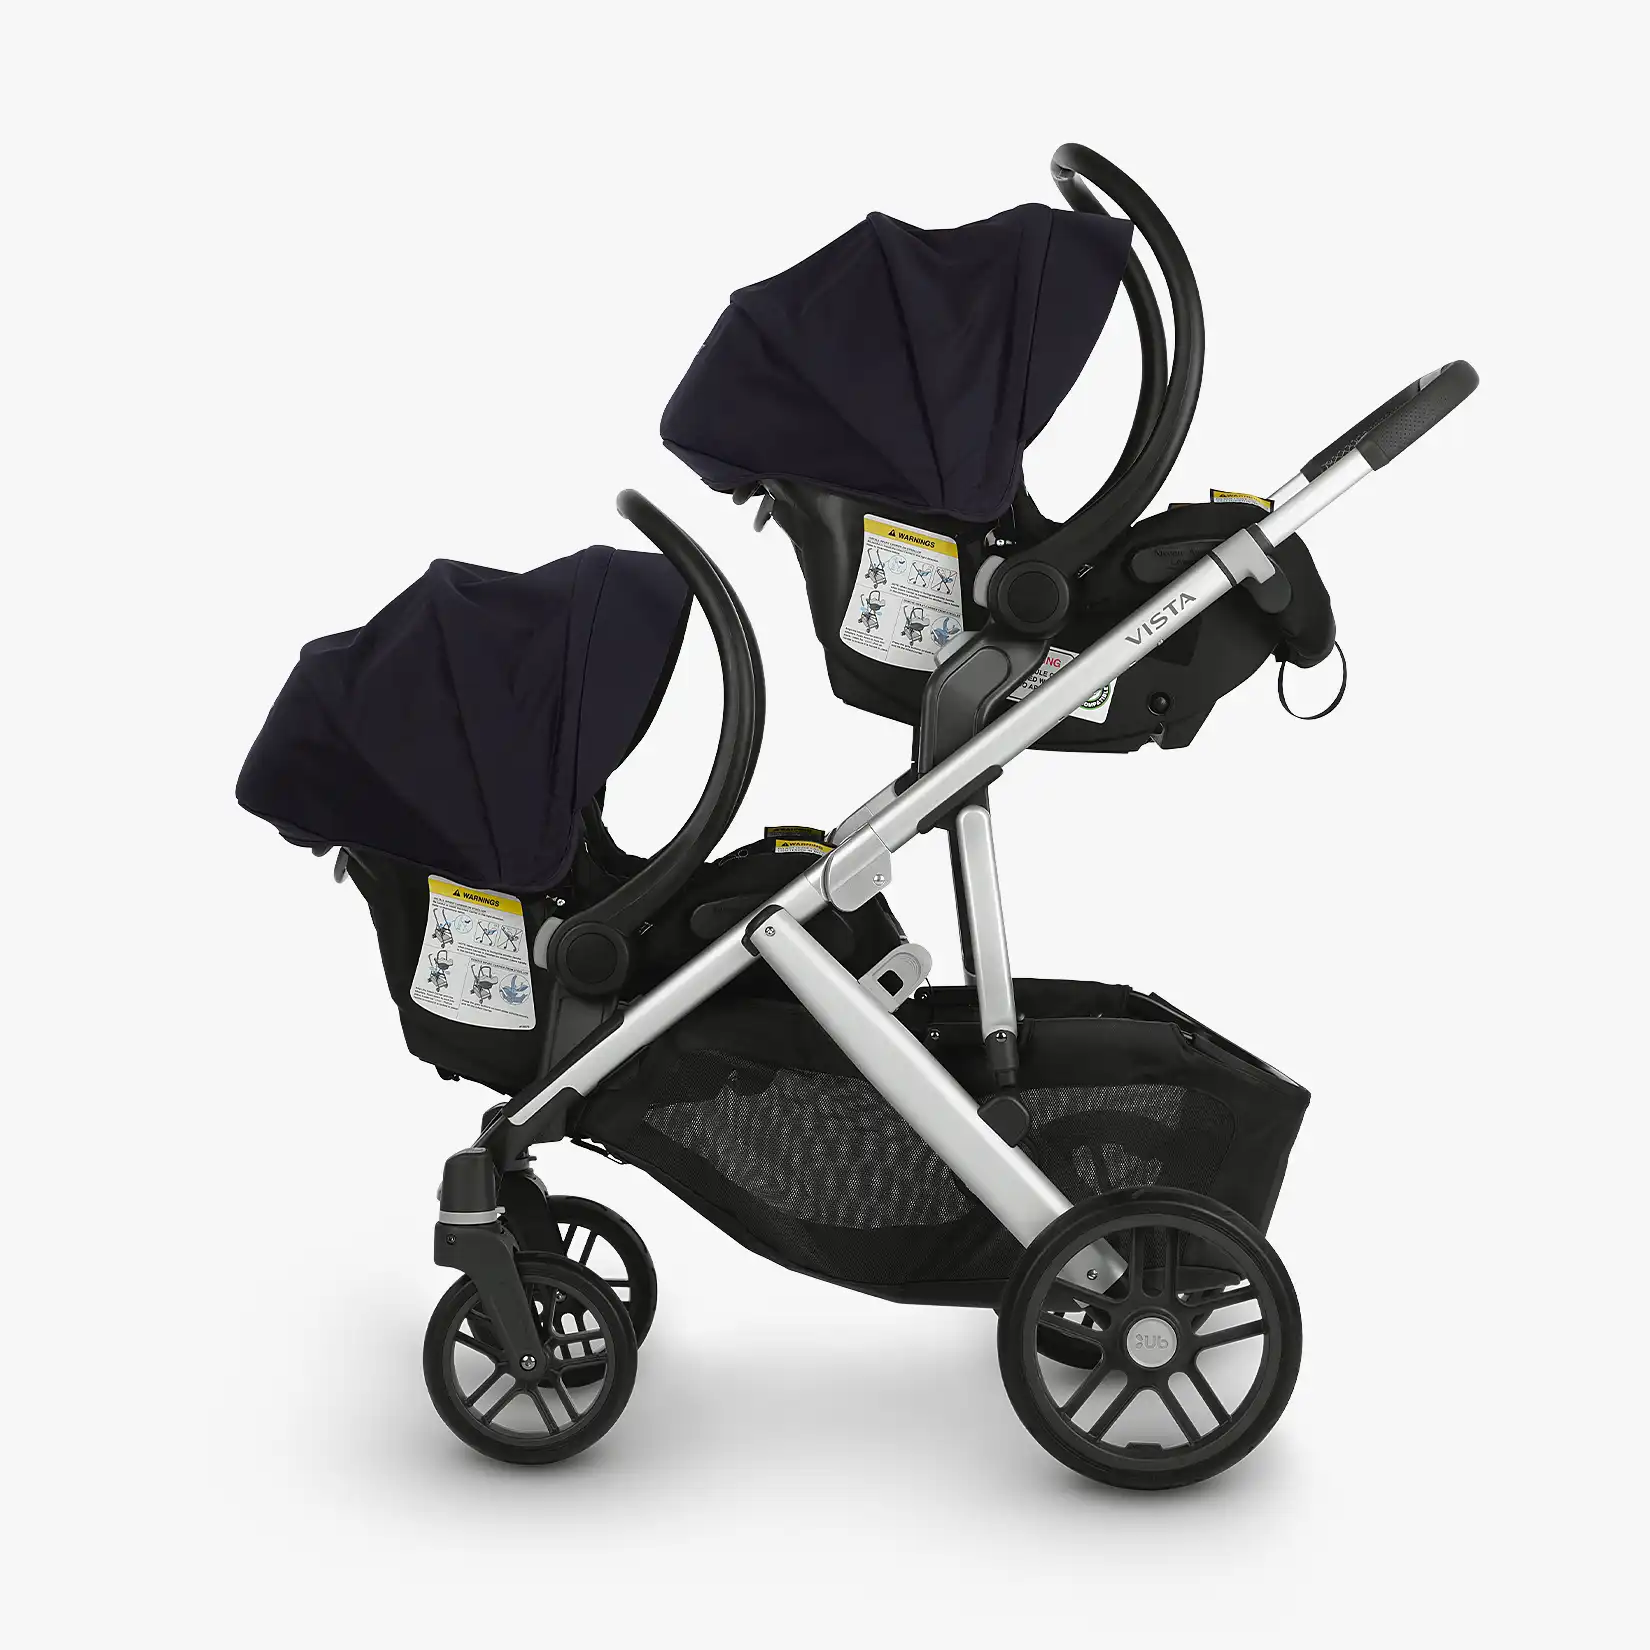 Weven Mentaliteit Leuk vinden Lower Adapters for VISTA and VISTA V2 (Maxi-Cosi®, Nuna®, Cybex, and  BeSafe®) | UPPAbaby